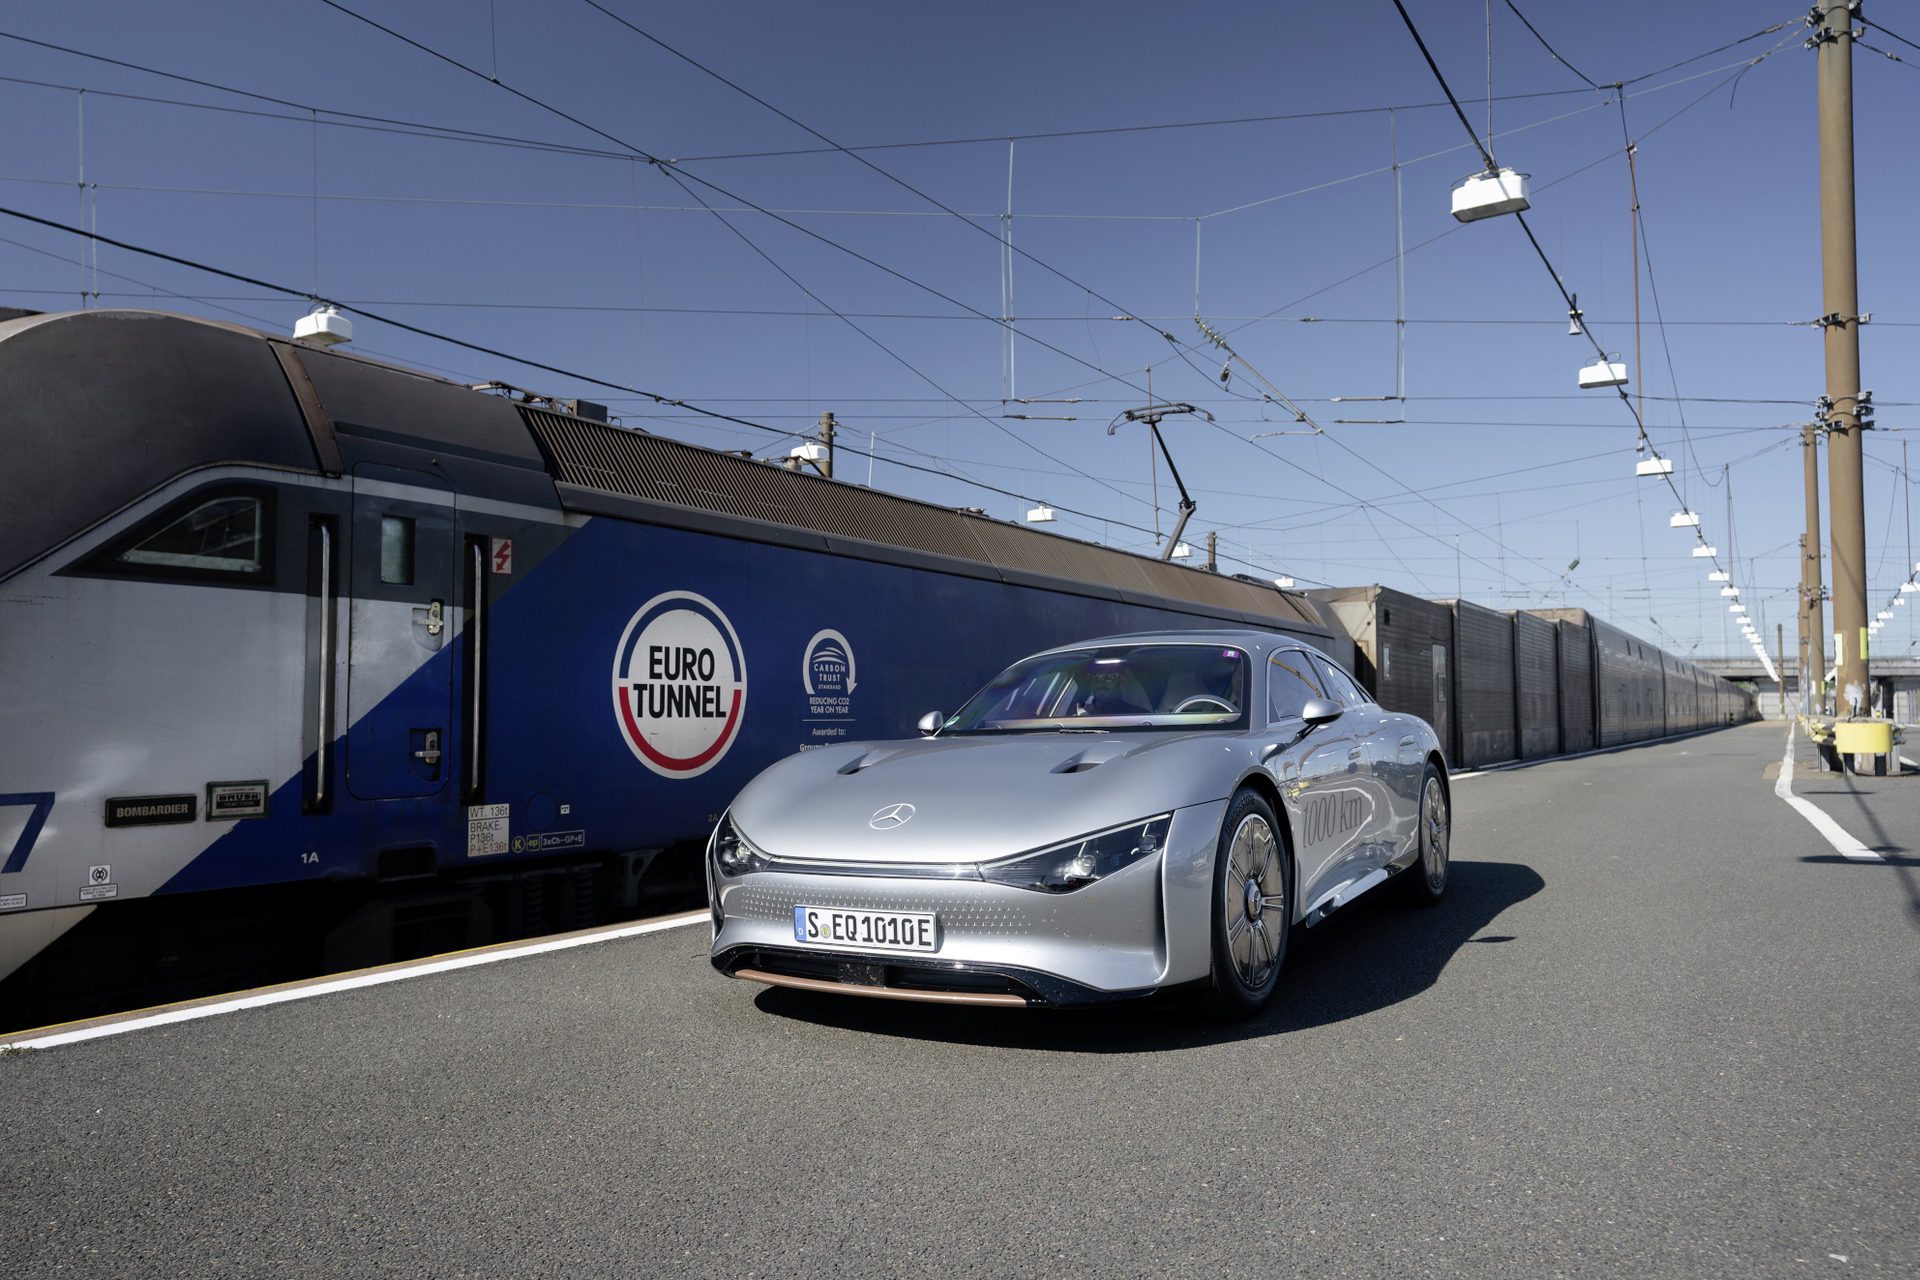 Mercedes-Benz VISION EQXX entering the UK after a successful EuroTunnel transit under the English Channel